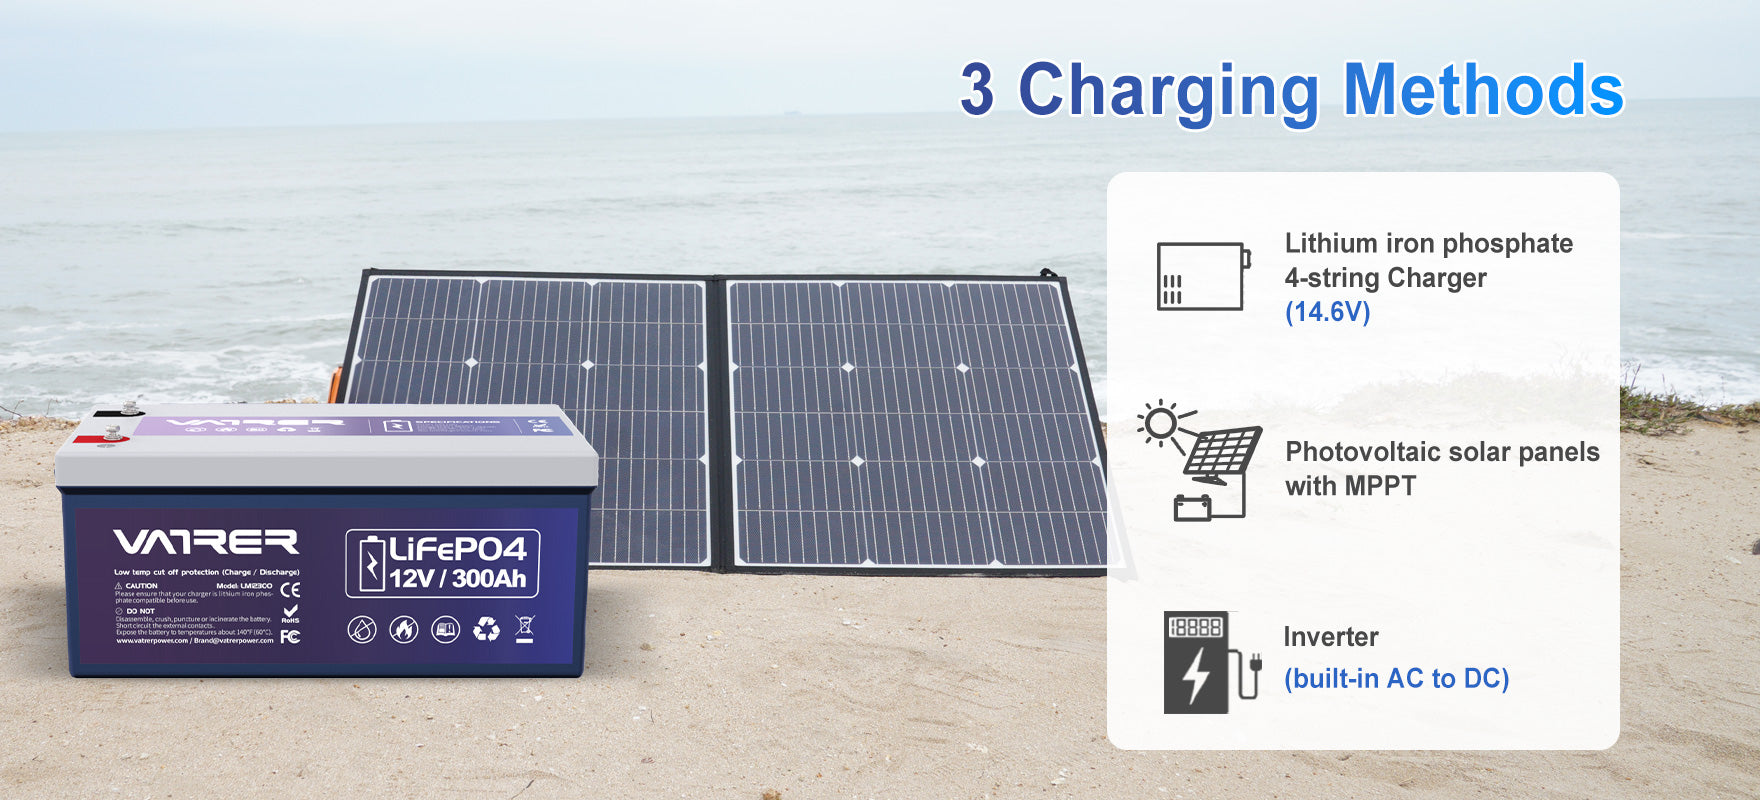 PIONERGY LiFePO4 Battery, 12V 300Ah Lithium Battery 4000+ Cycles  Rechargeable Iron Phosphate Battery for RV, Solar Power and Backup Battery  Low